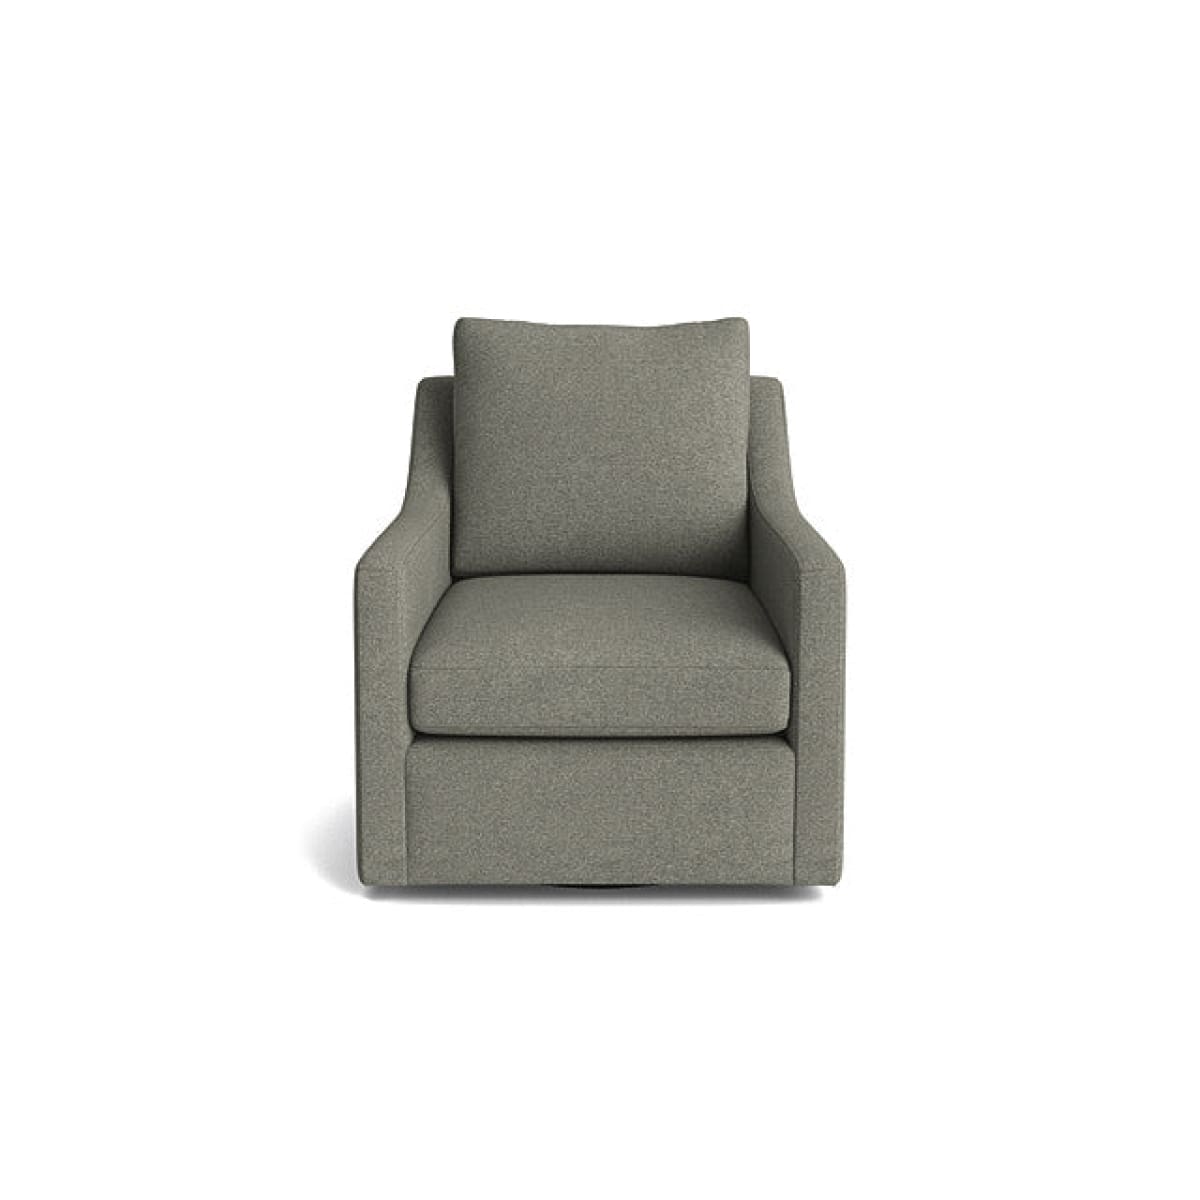 Grove Accent Chair - Prime Smoke